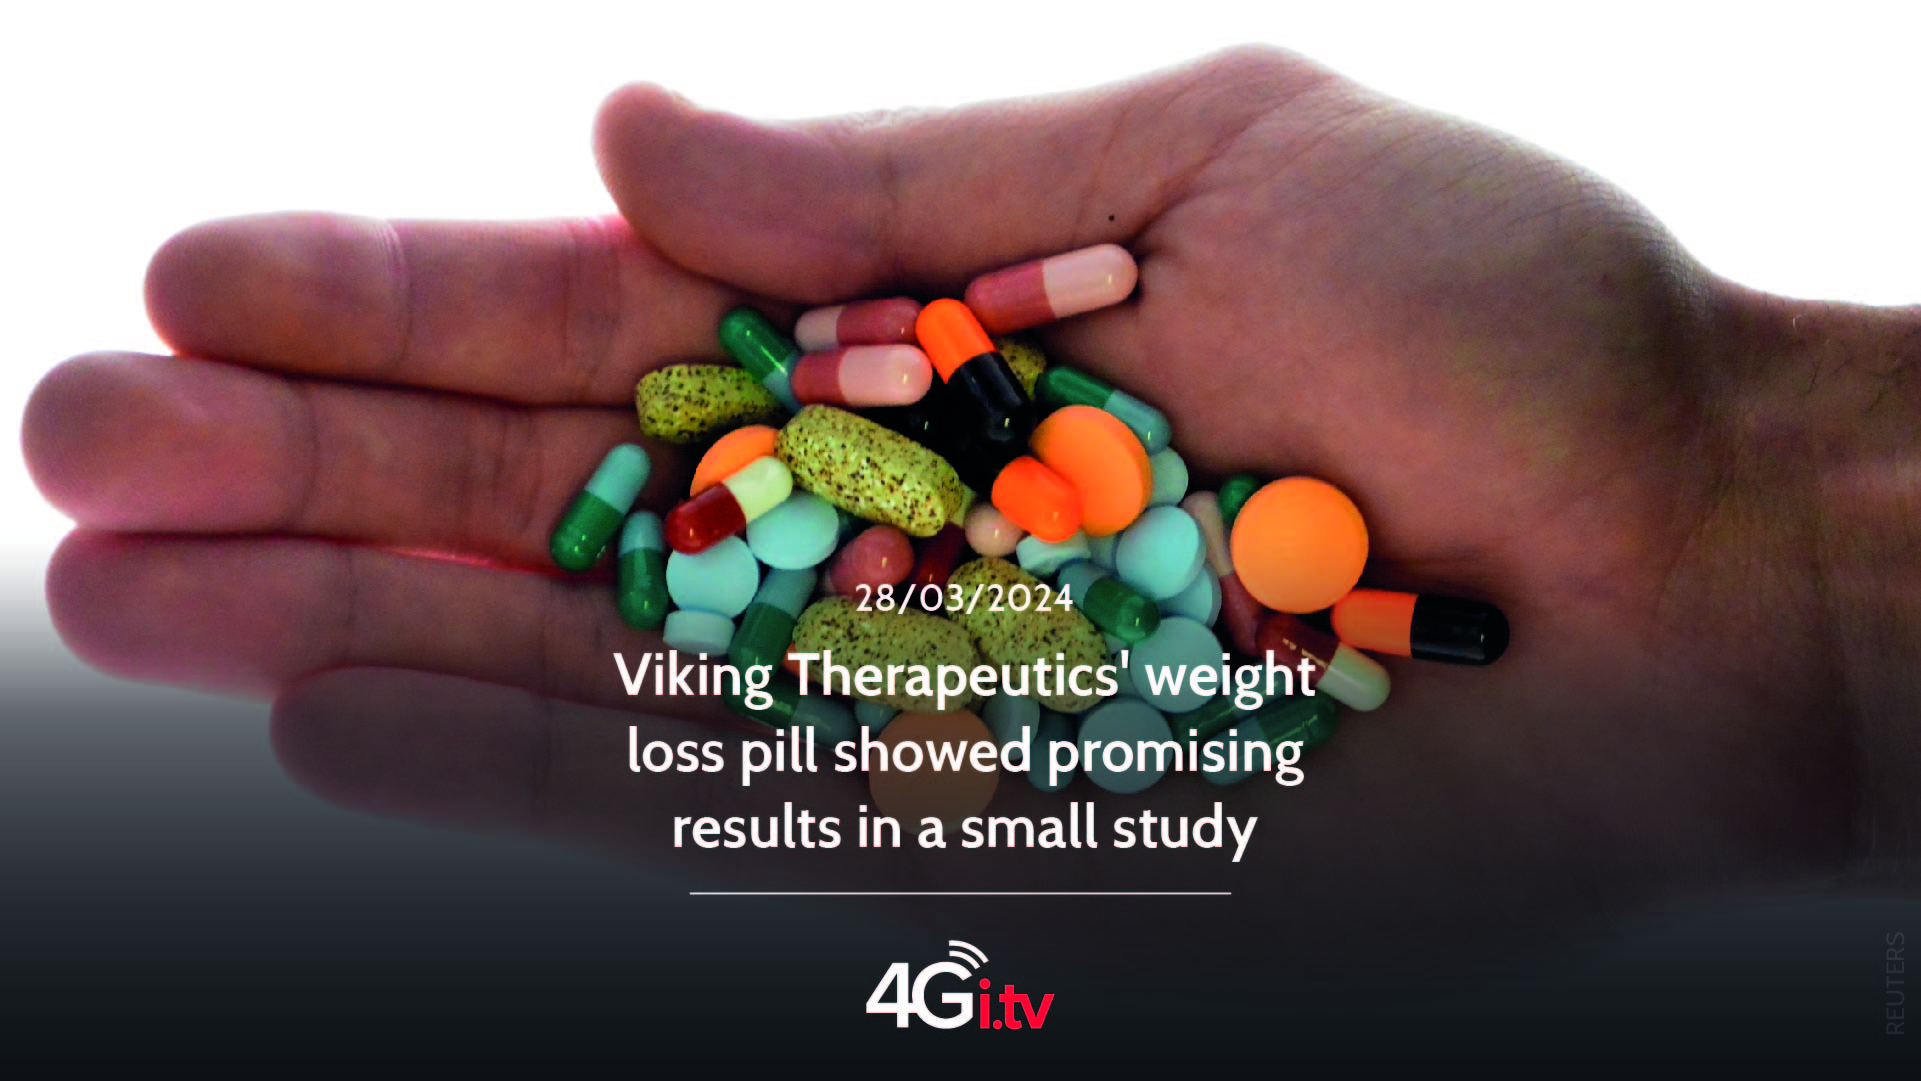 Lesen Sie mehr über den Artikel Viking Therapeutics’ weight loss pill showed promising results in a small study